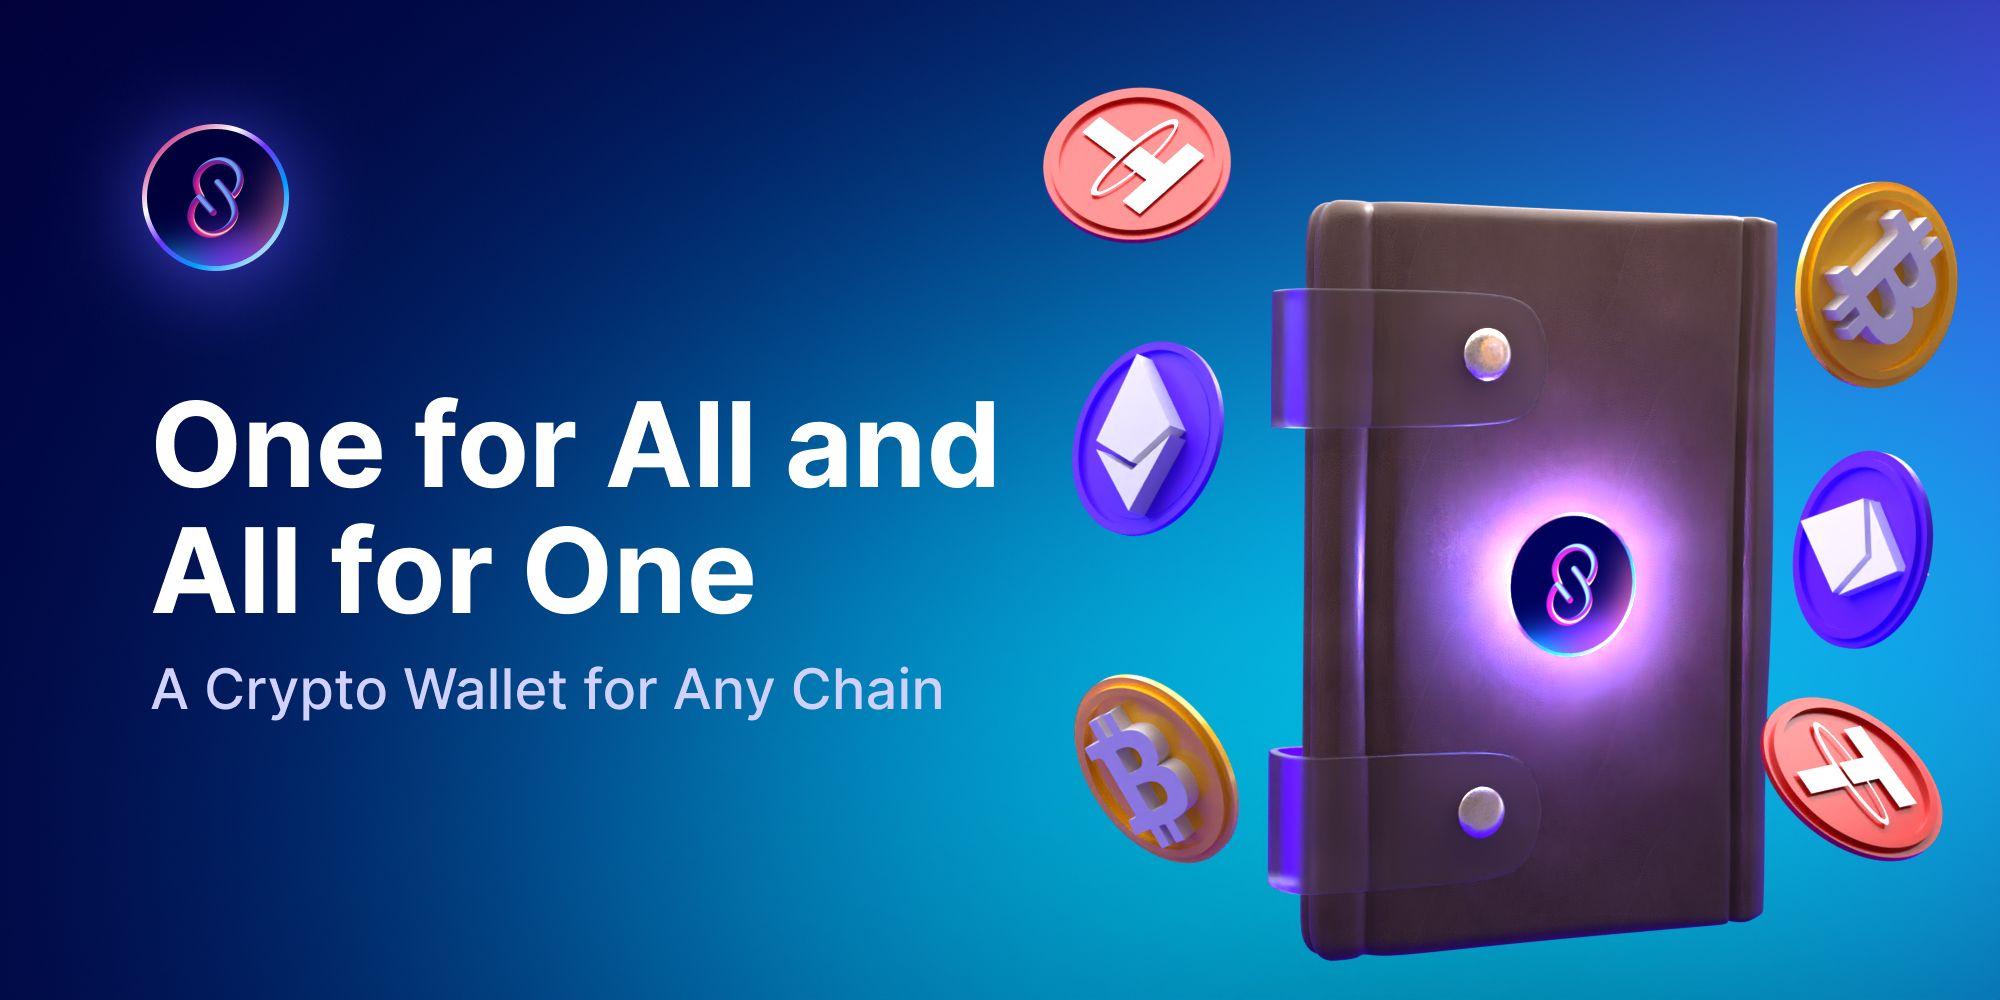 One for All and All for One: A Crypto Wallet for Any Chain